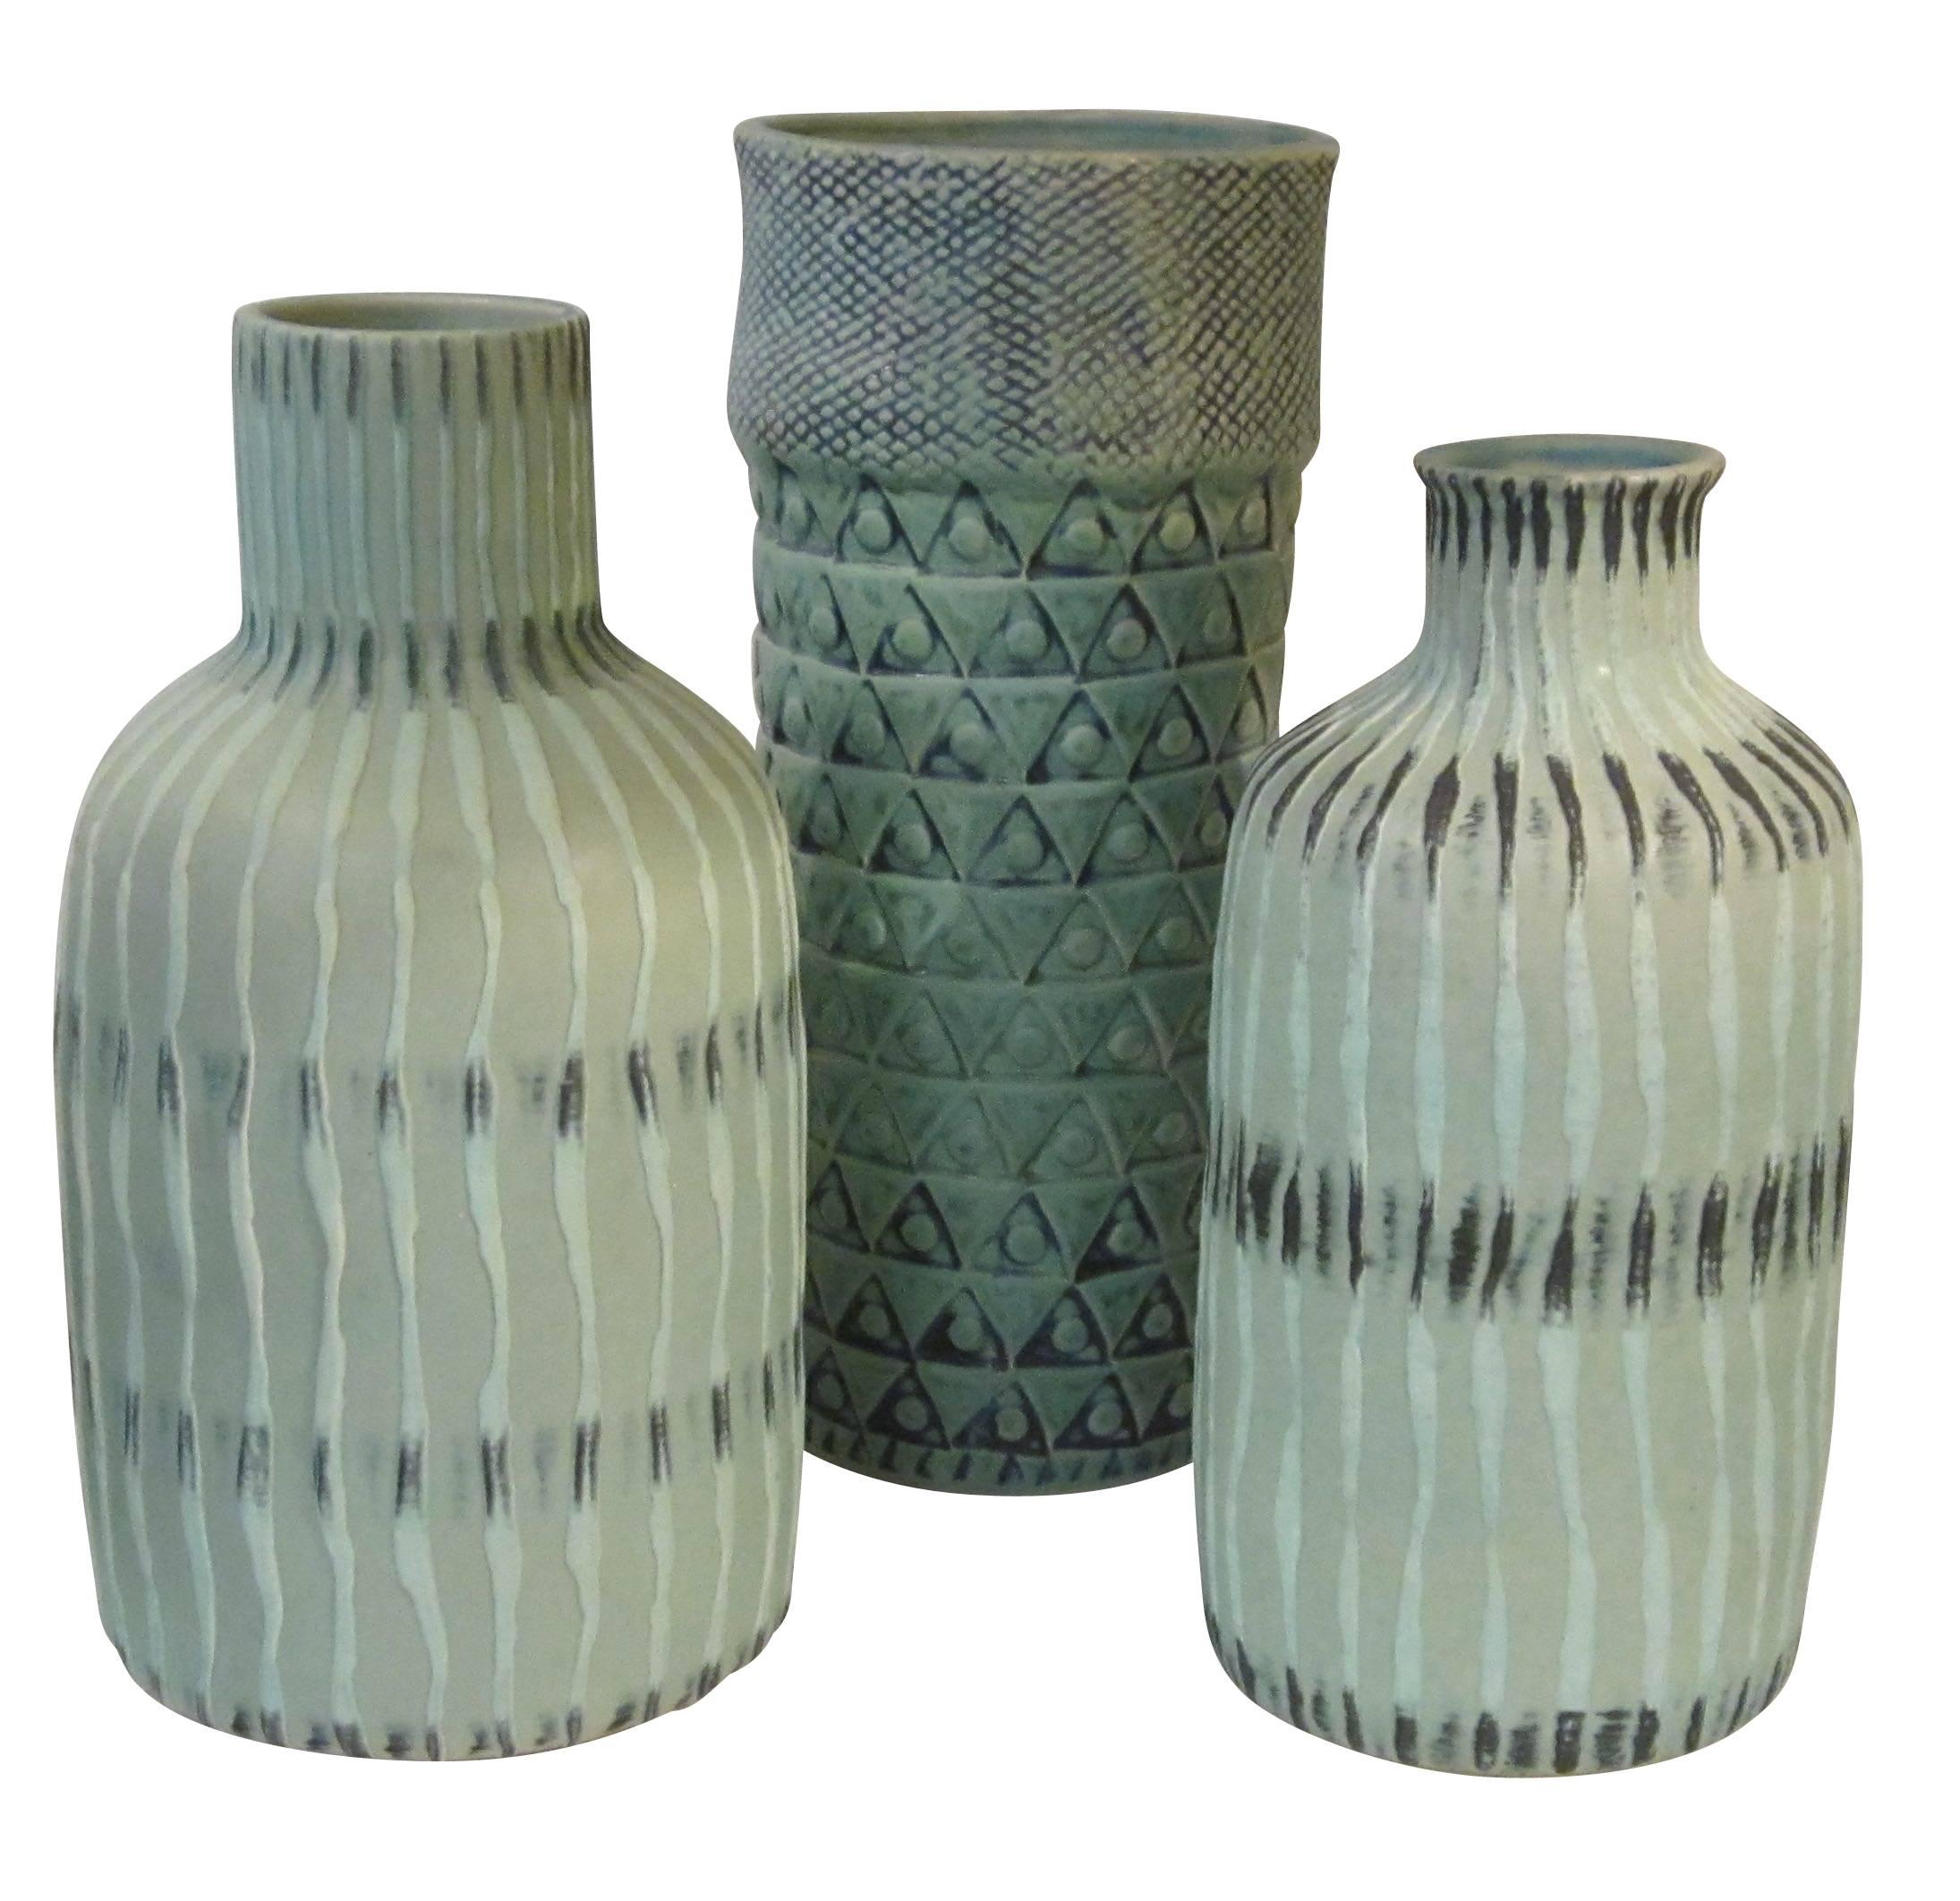 Contemporary medium sized seafoam textured and patterned stoneware vase from Thailand.
Part of an assortment of three textured vases which 
work beautifully as a collection or individually. See image #2.

        